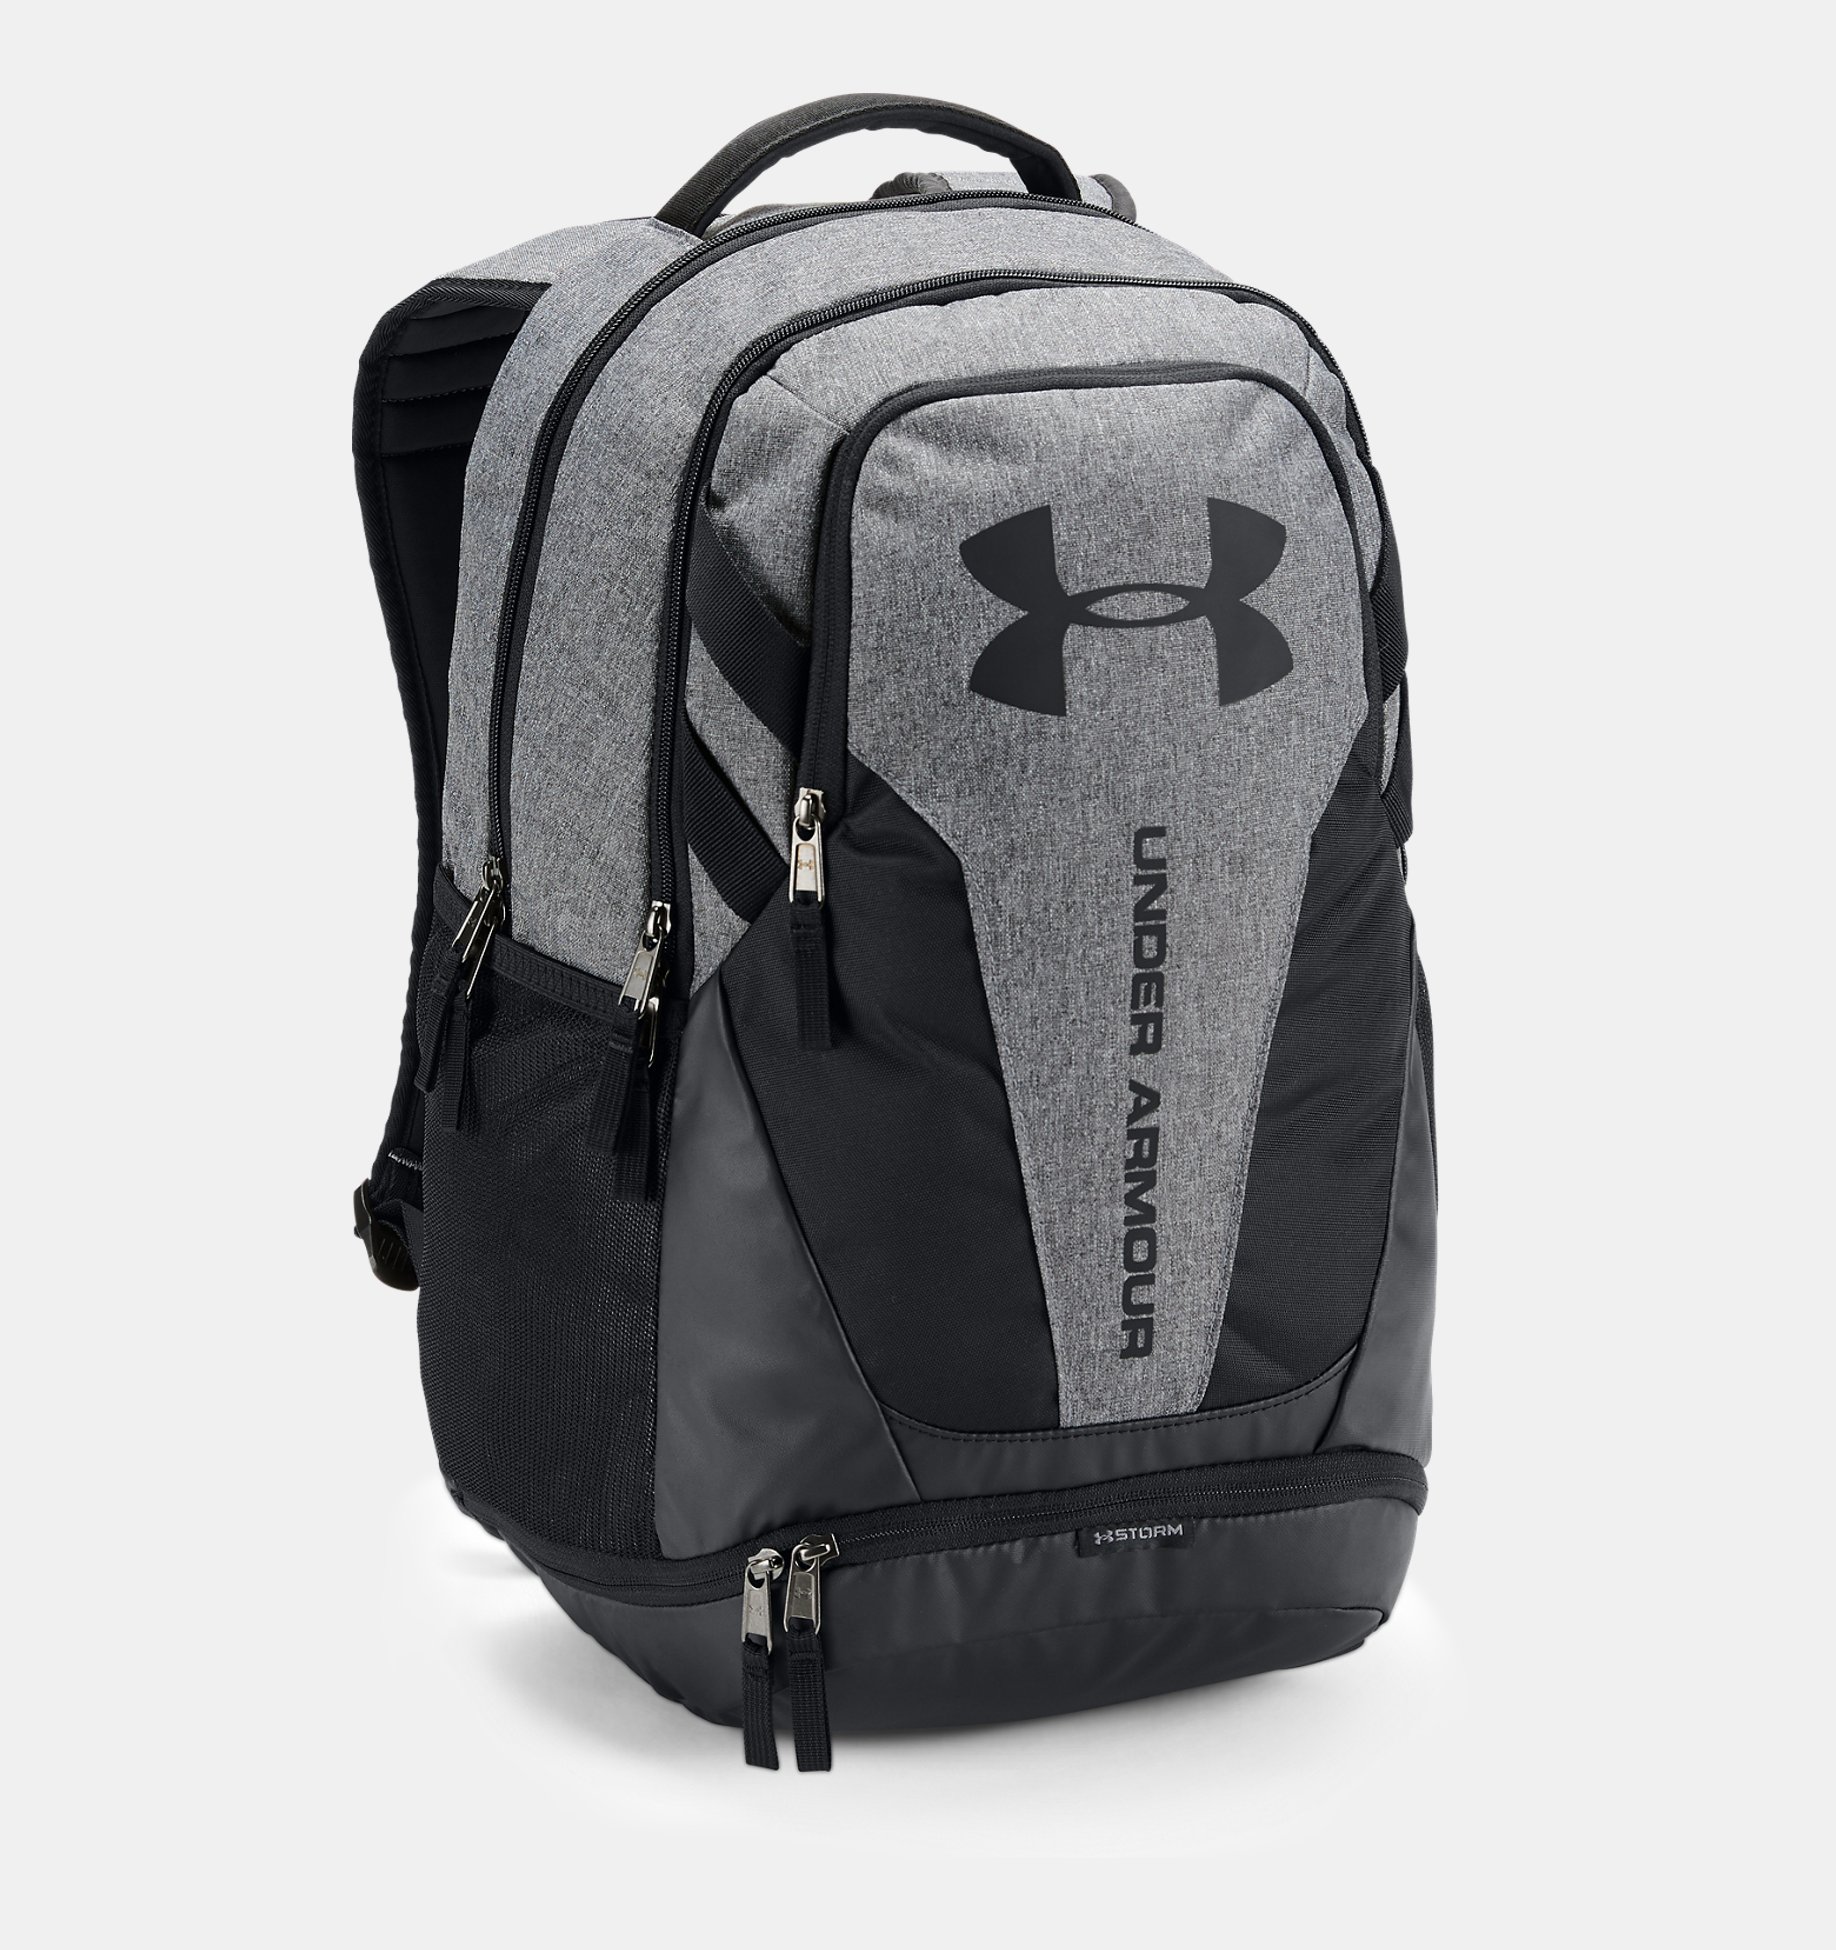 New With Tags Under Armour Hustle UA Storm 3.0 Backpack Laptop School Bag 